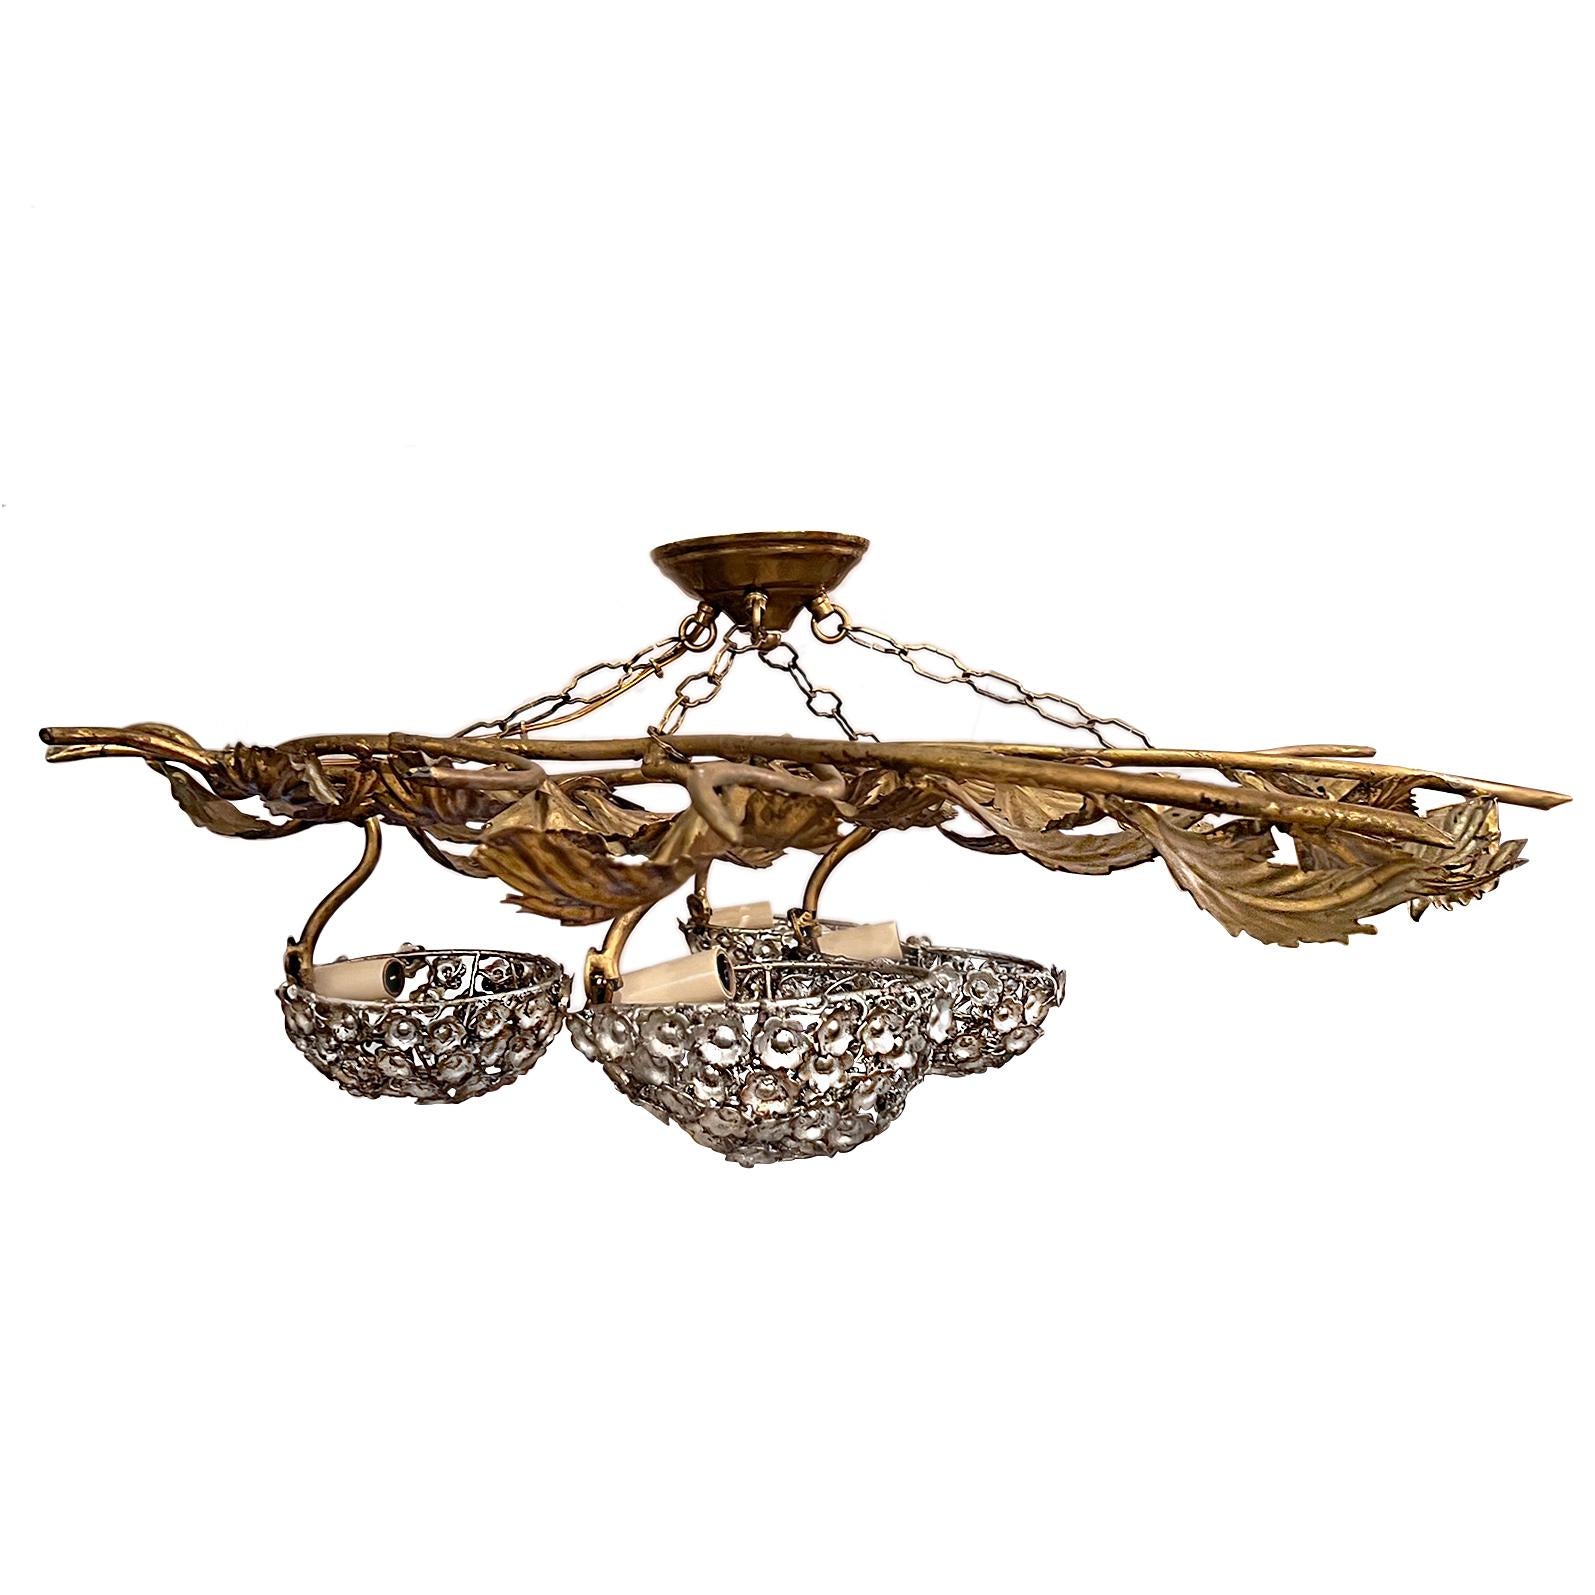 A circa 1960's Italian foliage and floral light fixture with 4 candelabra interior lights.

Measurements:
Min. drop: 16.5